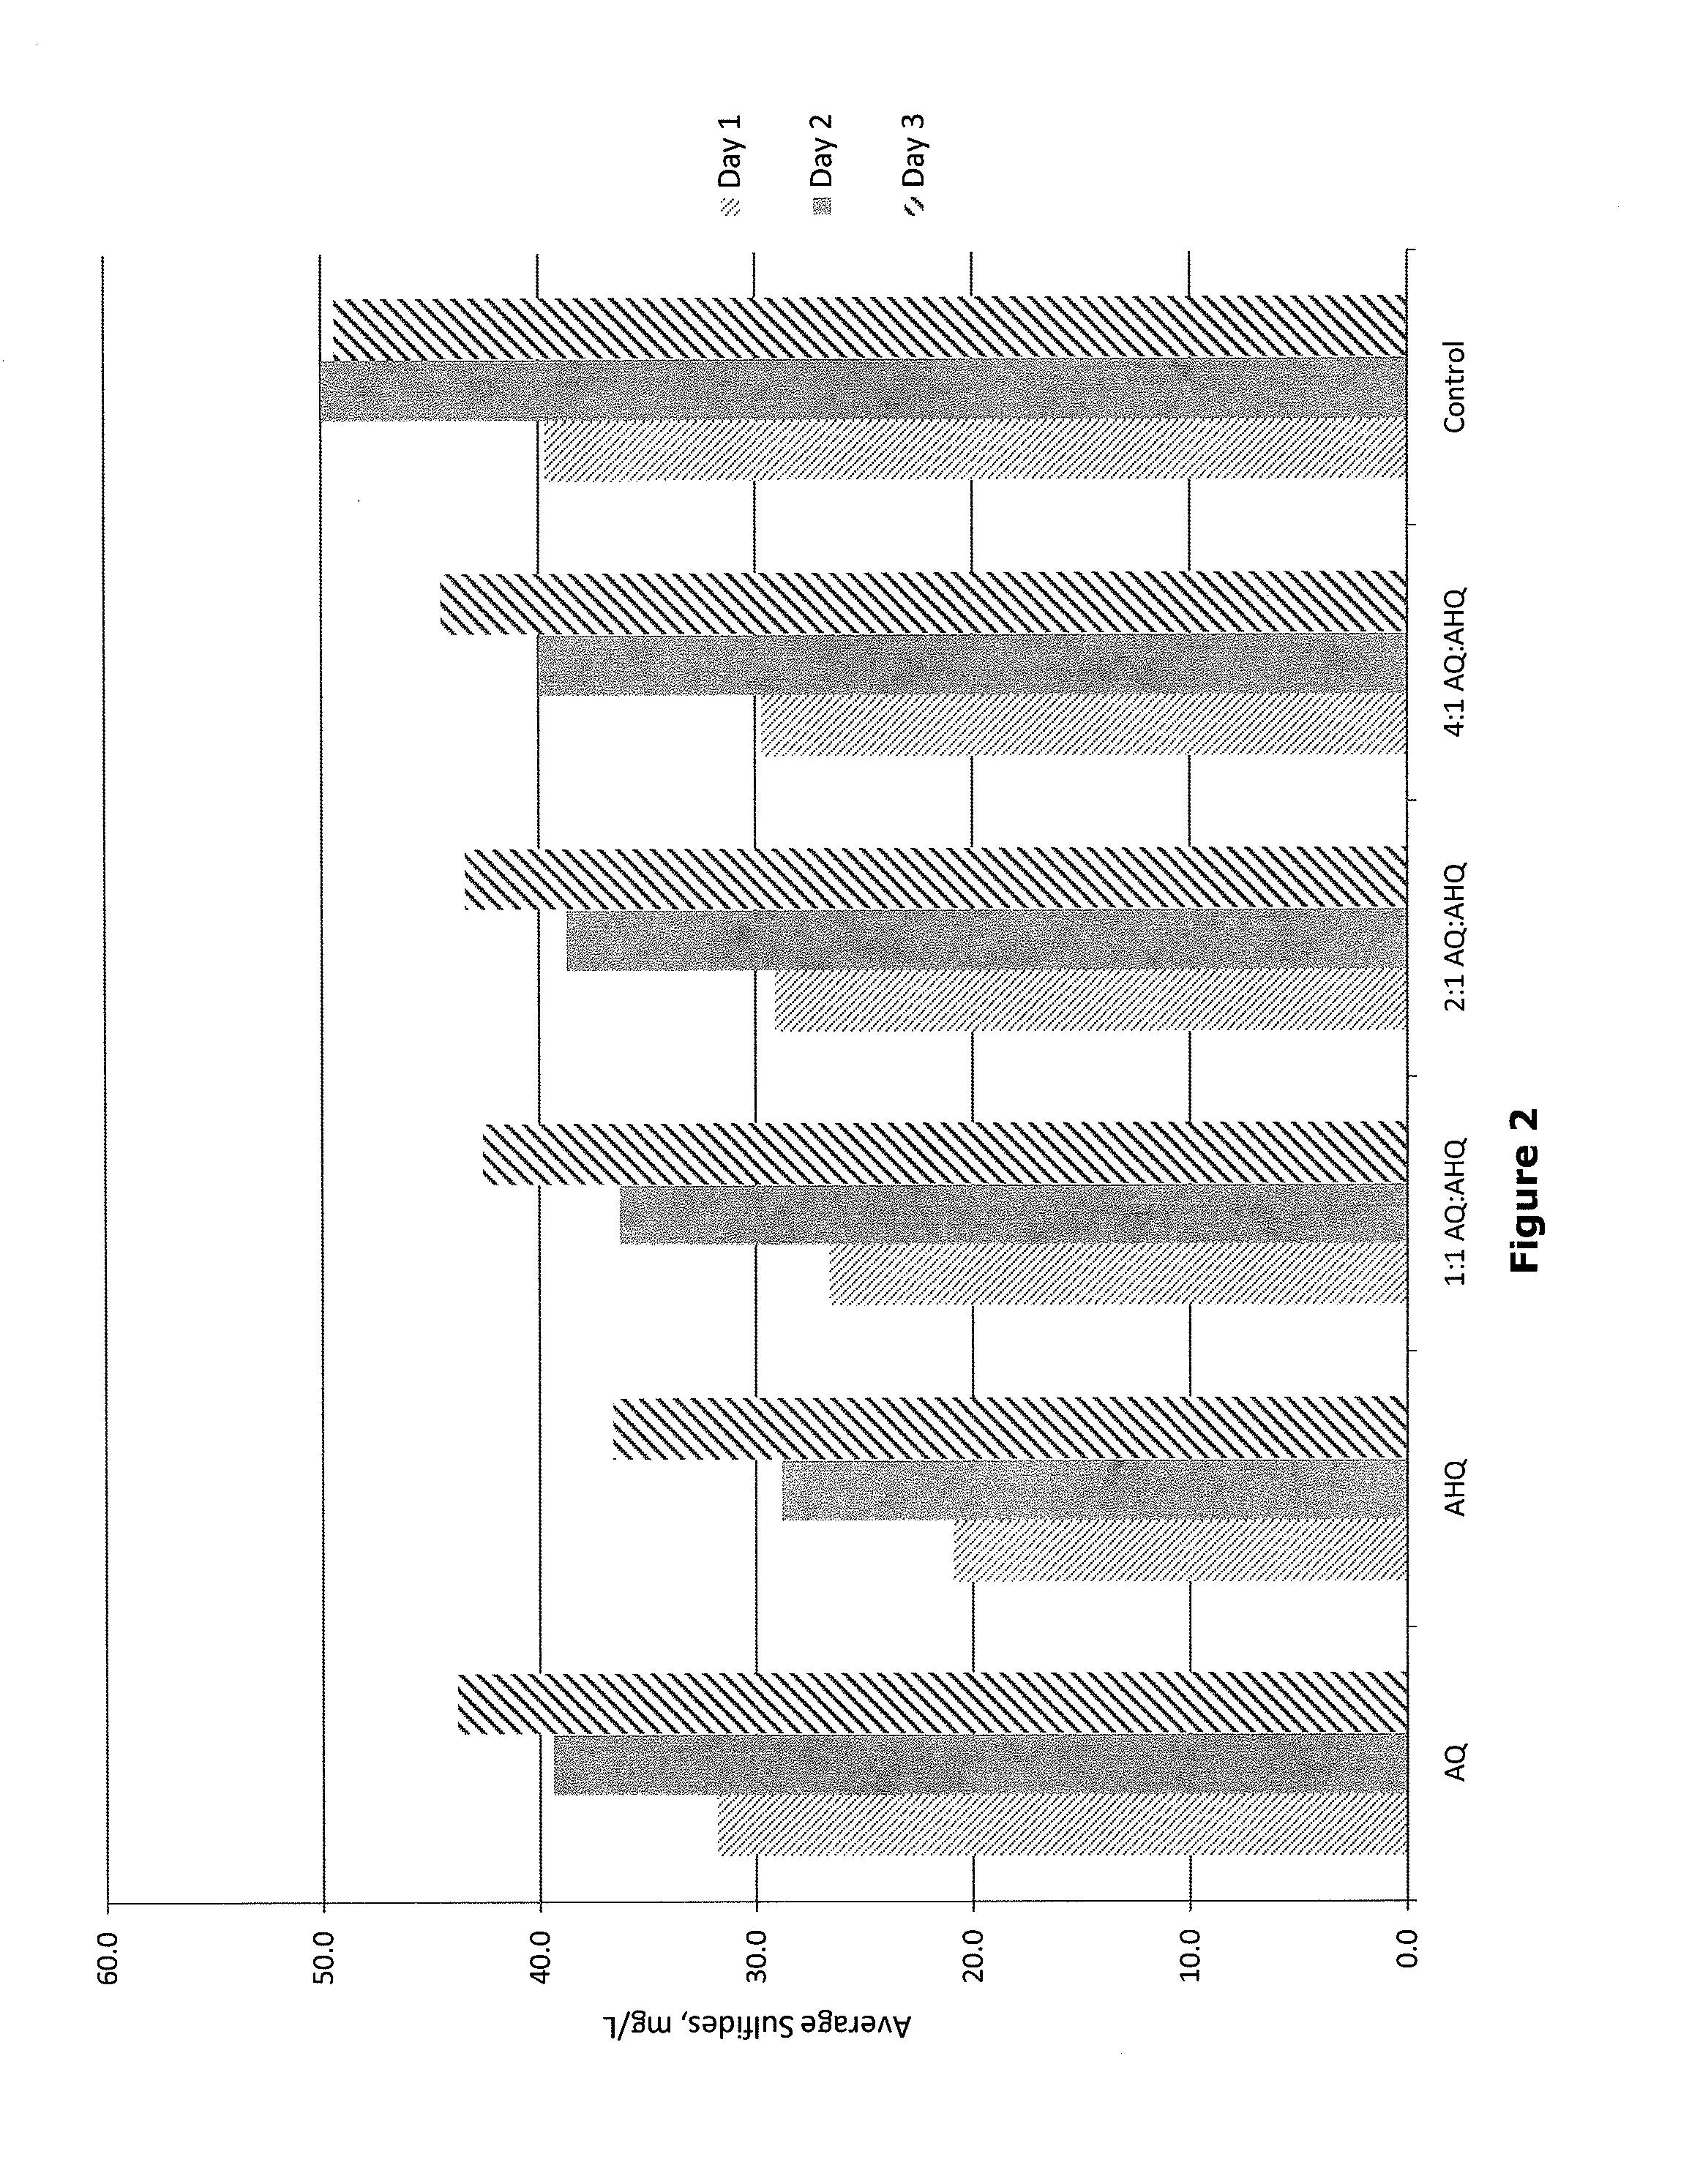 Composition and method for inhibiting biogenic sulfide generation